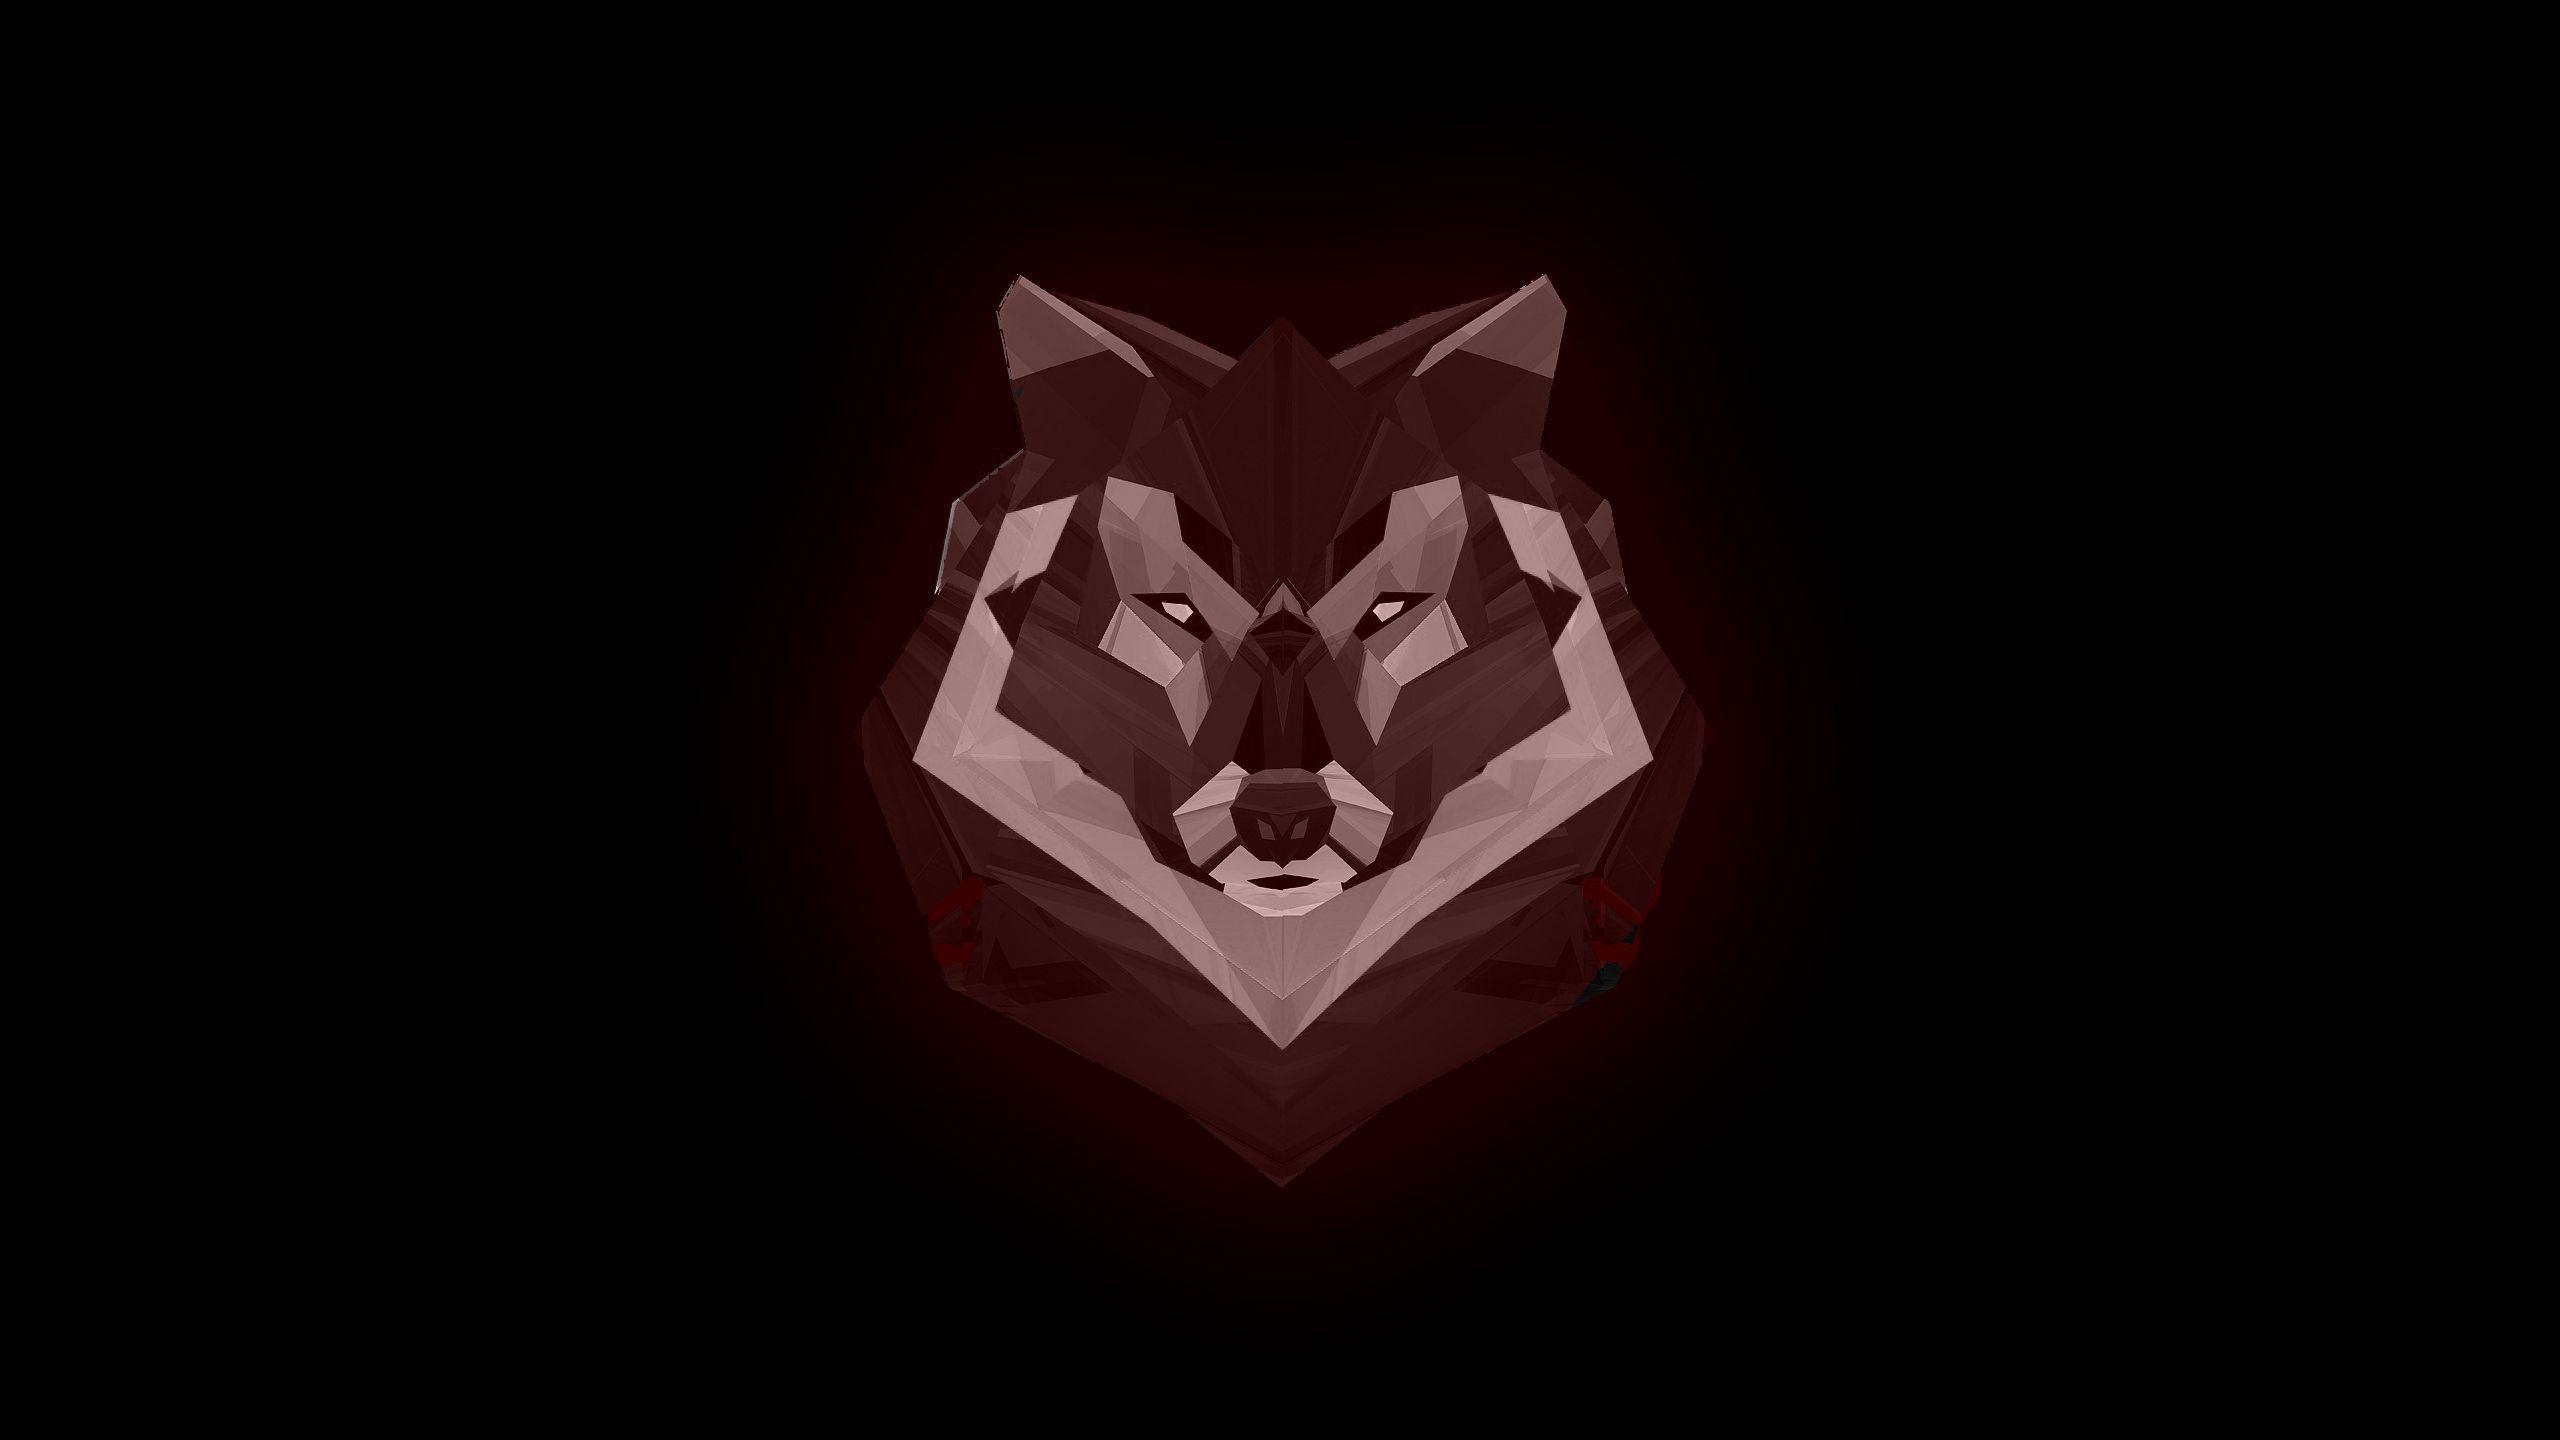 Cool Red Wolf Logo - Red Wolf Wallpapers - Wallpaper Cave